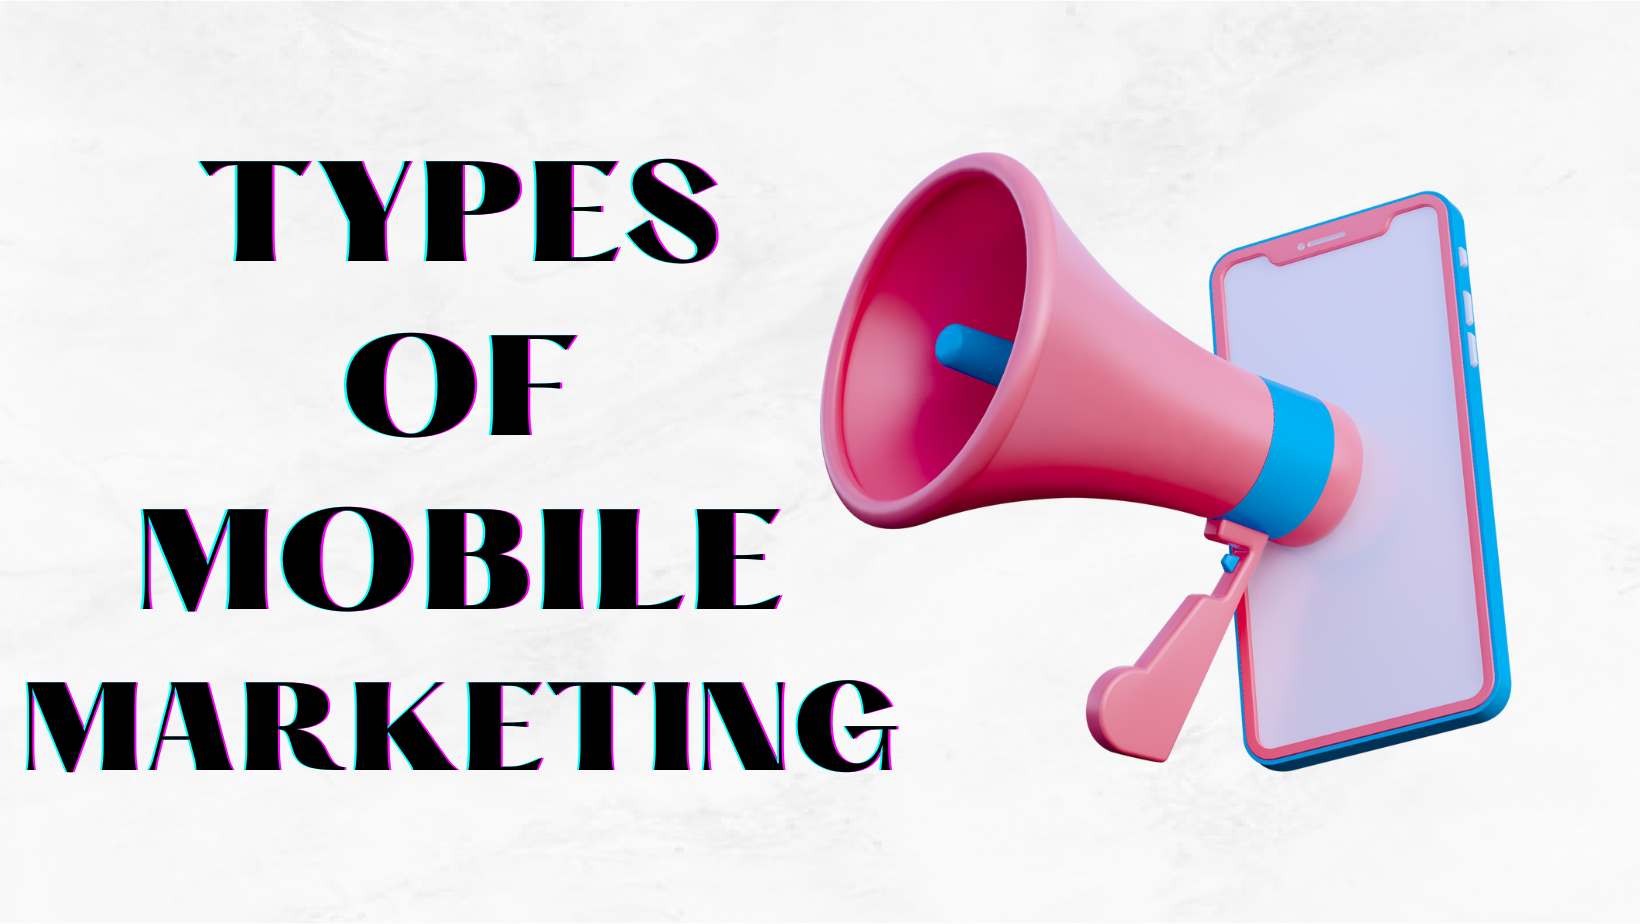 What are the different types of mobile marketing